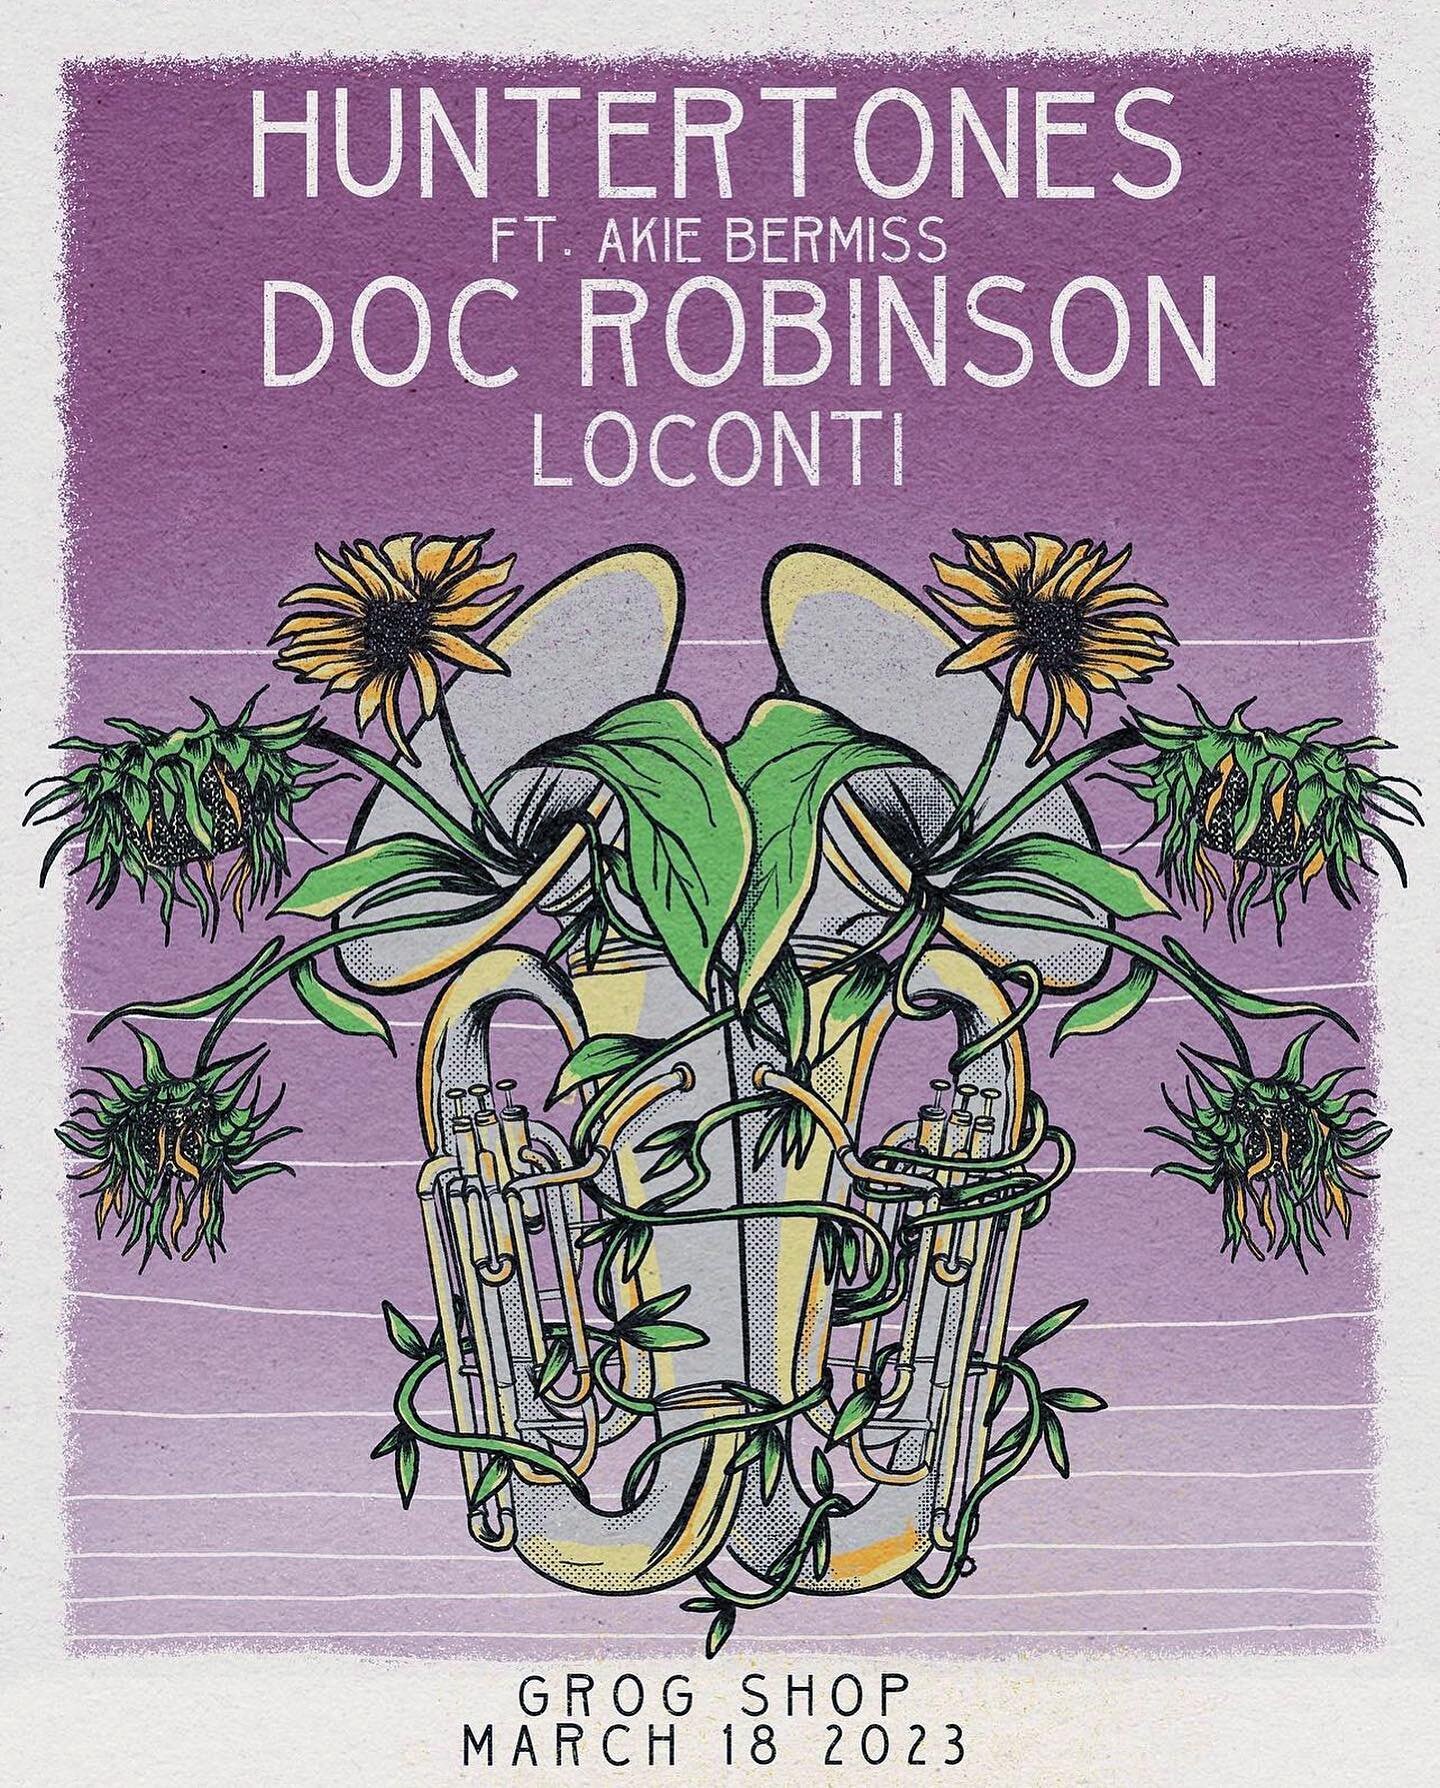 This Saturday night is going to be a show to remember! Tickets are almost sold out. 
Doors open 7:30PM we start at 8PM so get there early! 

Real excited to kick the night off for @doc_robinson_ &amp; @huntertonesband 
@thegrogshop 

See you there💜